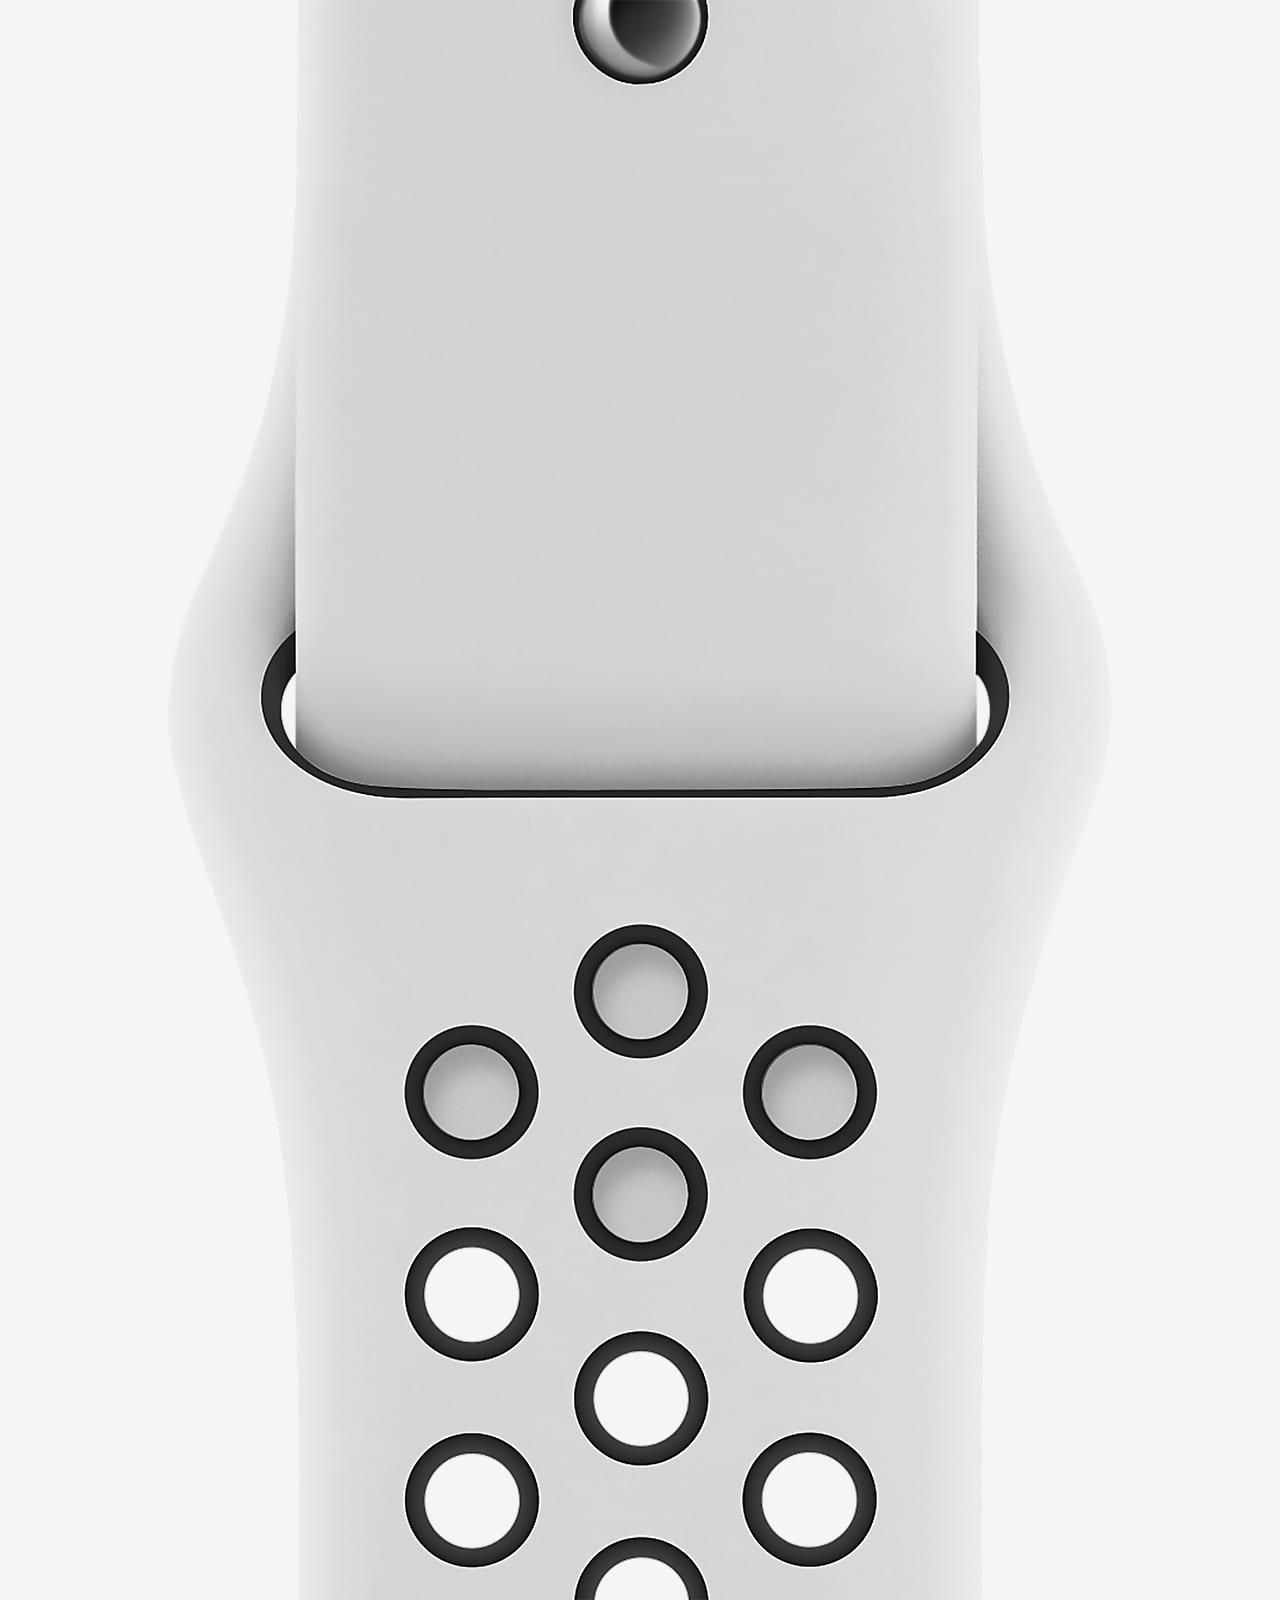 Apple Watch Nike Series 5 (GPS + Cellular) with Nike Sport Band Open Box  44mm Silver Aluminium Case